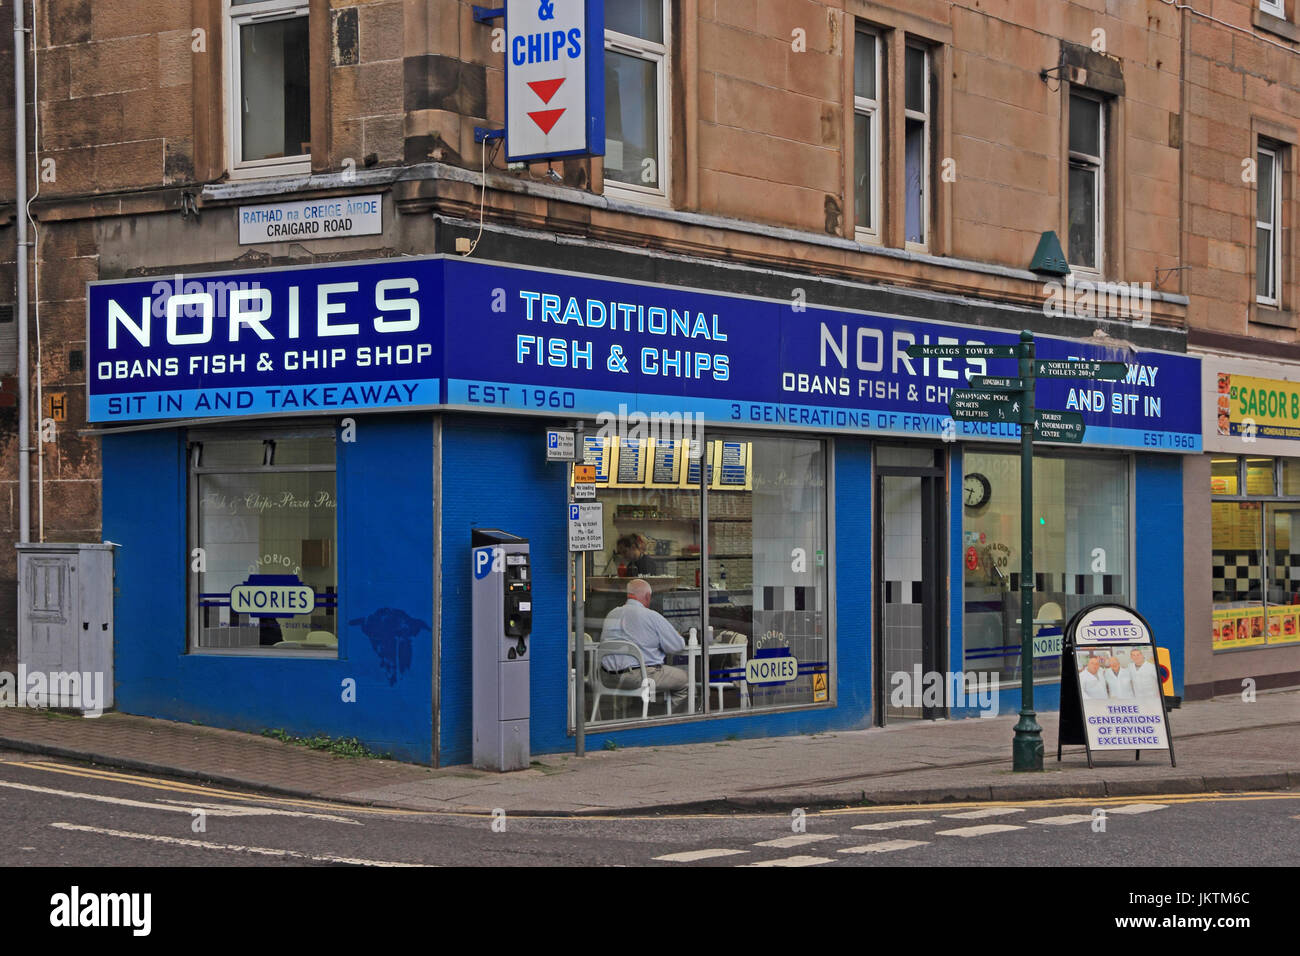 Nories traditional fish and chip shop, Oban, Scotland Stock Photo